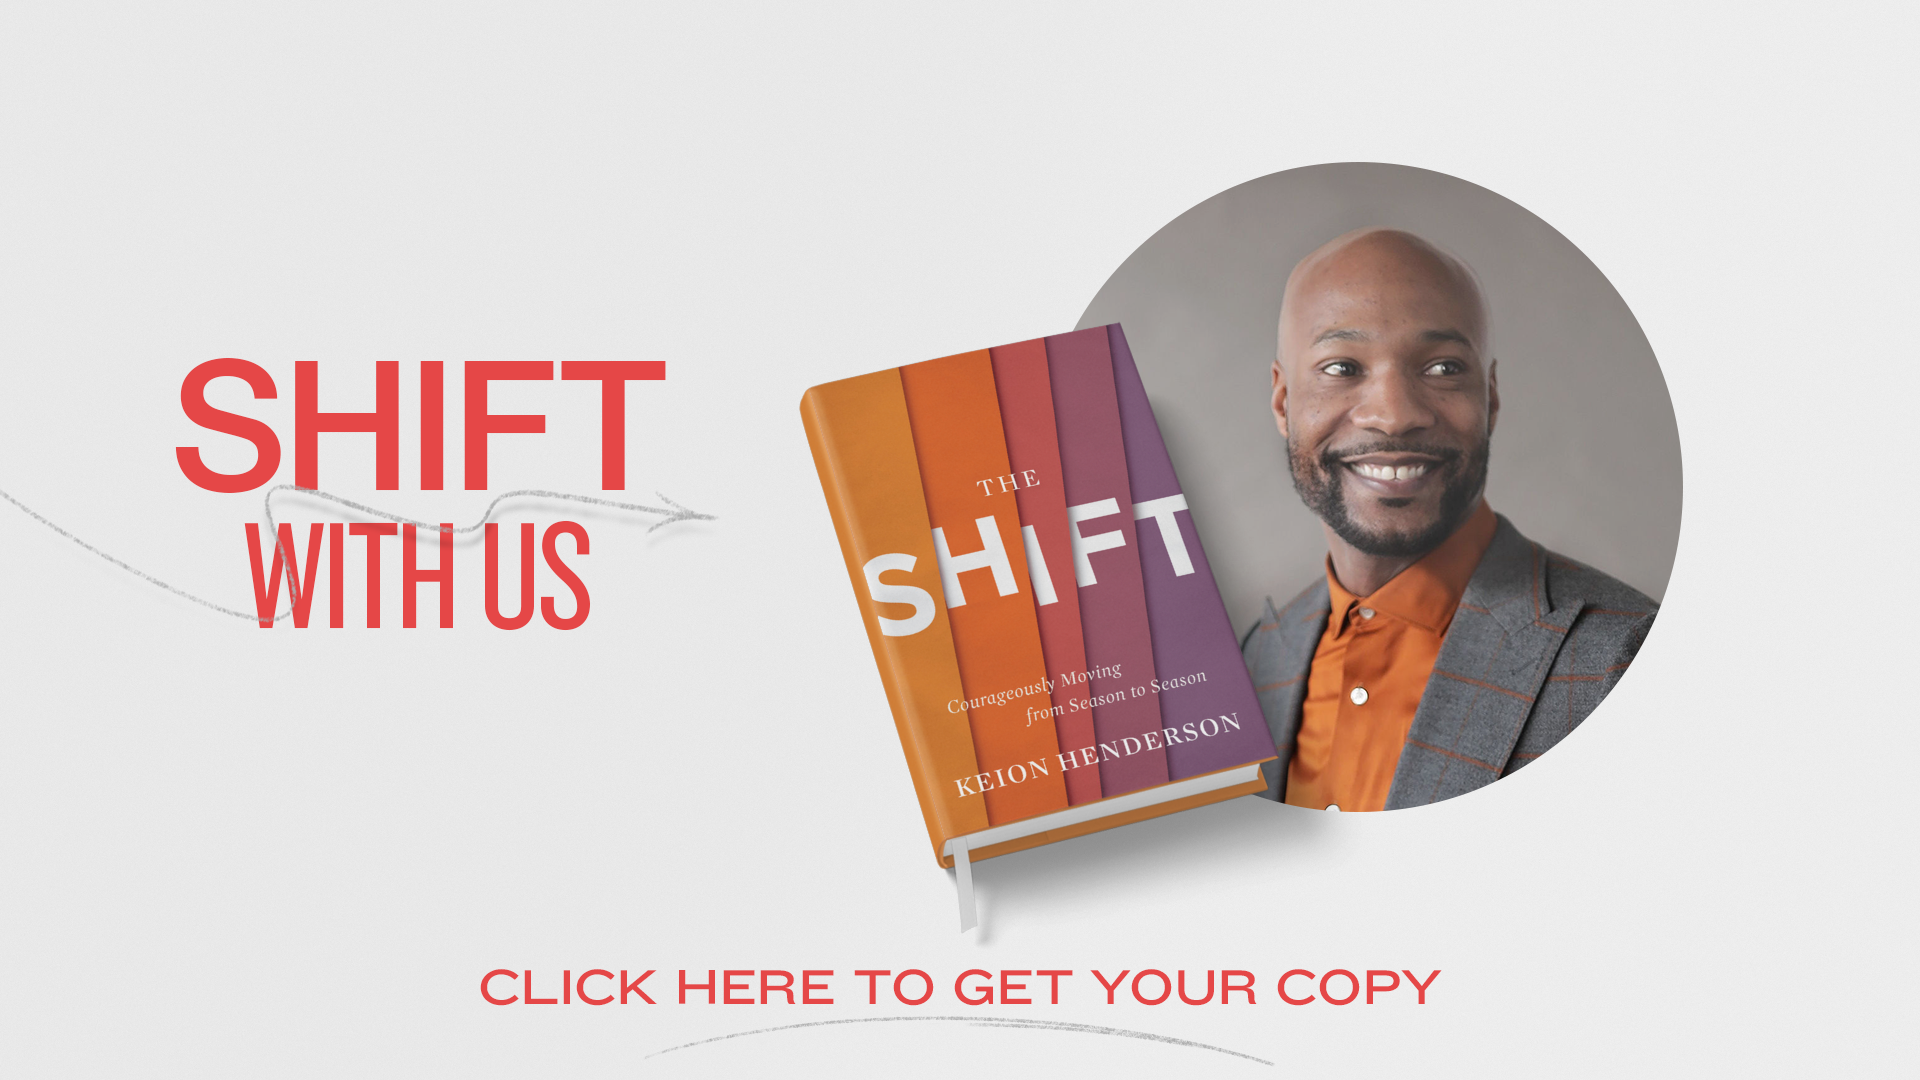 TheShift-Web2 - Growing Ministries